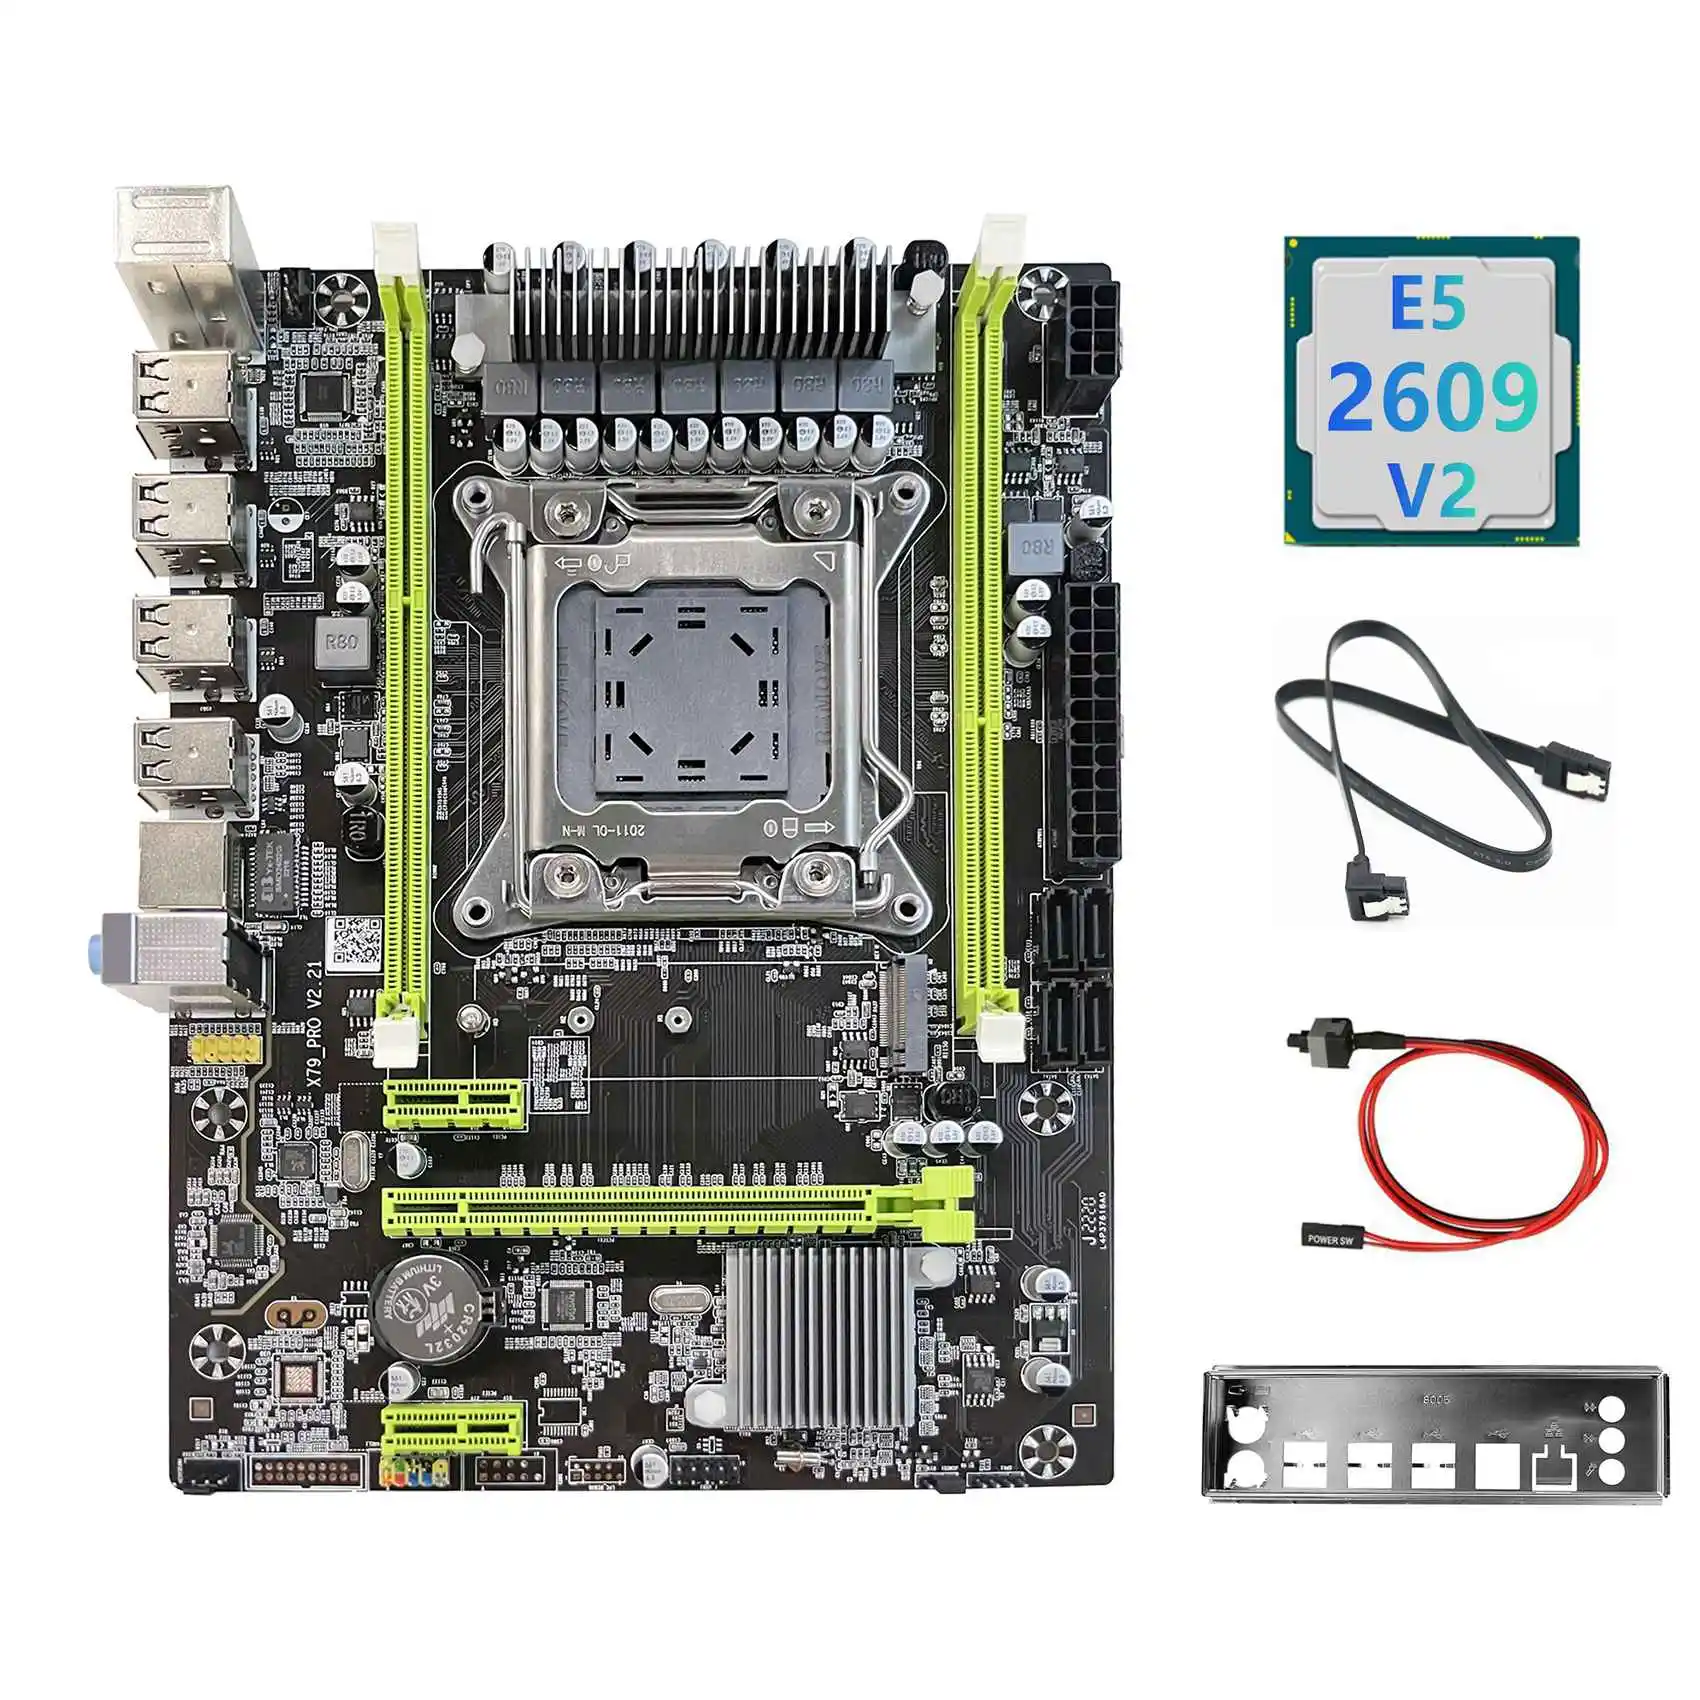 X79 Motherboard Upgrade X79 Pro+E5 2609 V2 CPU+SATA Cable+Switch Cable+Baffle M.2 NVME LGA2011 for LOL CF PUBG